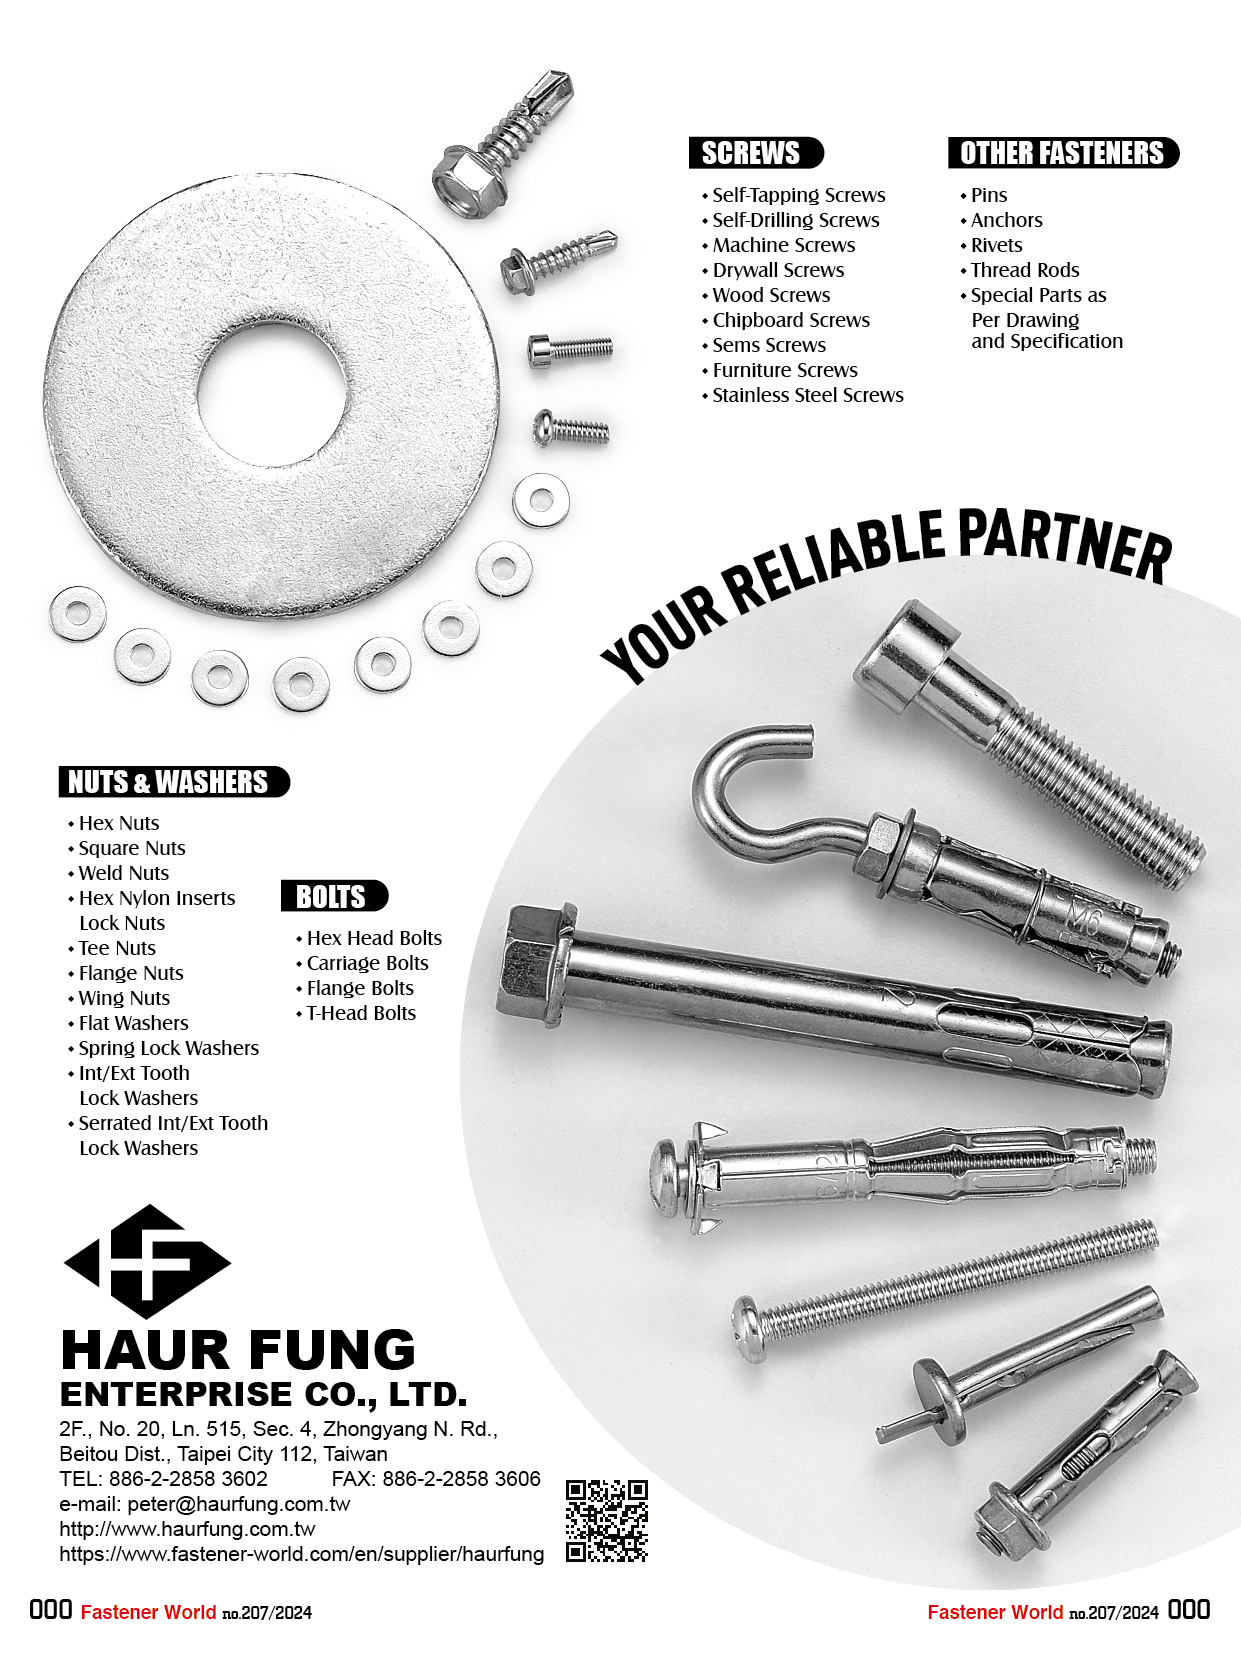 HAUR FUNG ENTERPRISE CO. LTD.  , SCREWS, SELF-DRILLING SCREWS, MACHINE SCREWS, DRYWALL SCREWS, WOOD SCREWS, CHIPBOARD SCREWS, SEMS SCREWS, FURNITURE SCREWS, STAINLESS STEEL SCREWS, THREAD FORMING SCREWS, BOLTS, HEX HEAD BOLTS, CARRIAGE BOLTS, FLANGE BOLTS, T-HEAD BOLTS, WHEEL BOLTS, NUTS, WASHERS, HEX NUTS, SQUARE NUTS, WELD NUTS, HEX NYLON INSERTS LOCK NUTS, TEE NUTS, FLANGE NUTS, WING NUTS, FLAT WASHERS, SPRING LOCK WASHERS, INT/EXT TOOTH LOCK WASHERS, SERRATED INT/EXT TOOTH LOCK WASHERS, FASTENERS, PINS, ANCHORS, RIVETS, THREAD RODS, SPECIAL PARTS AS PER DRAWING AND SPECIFICATION